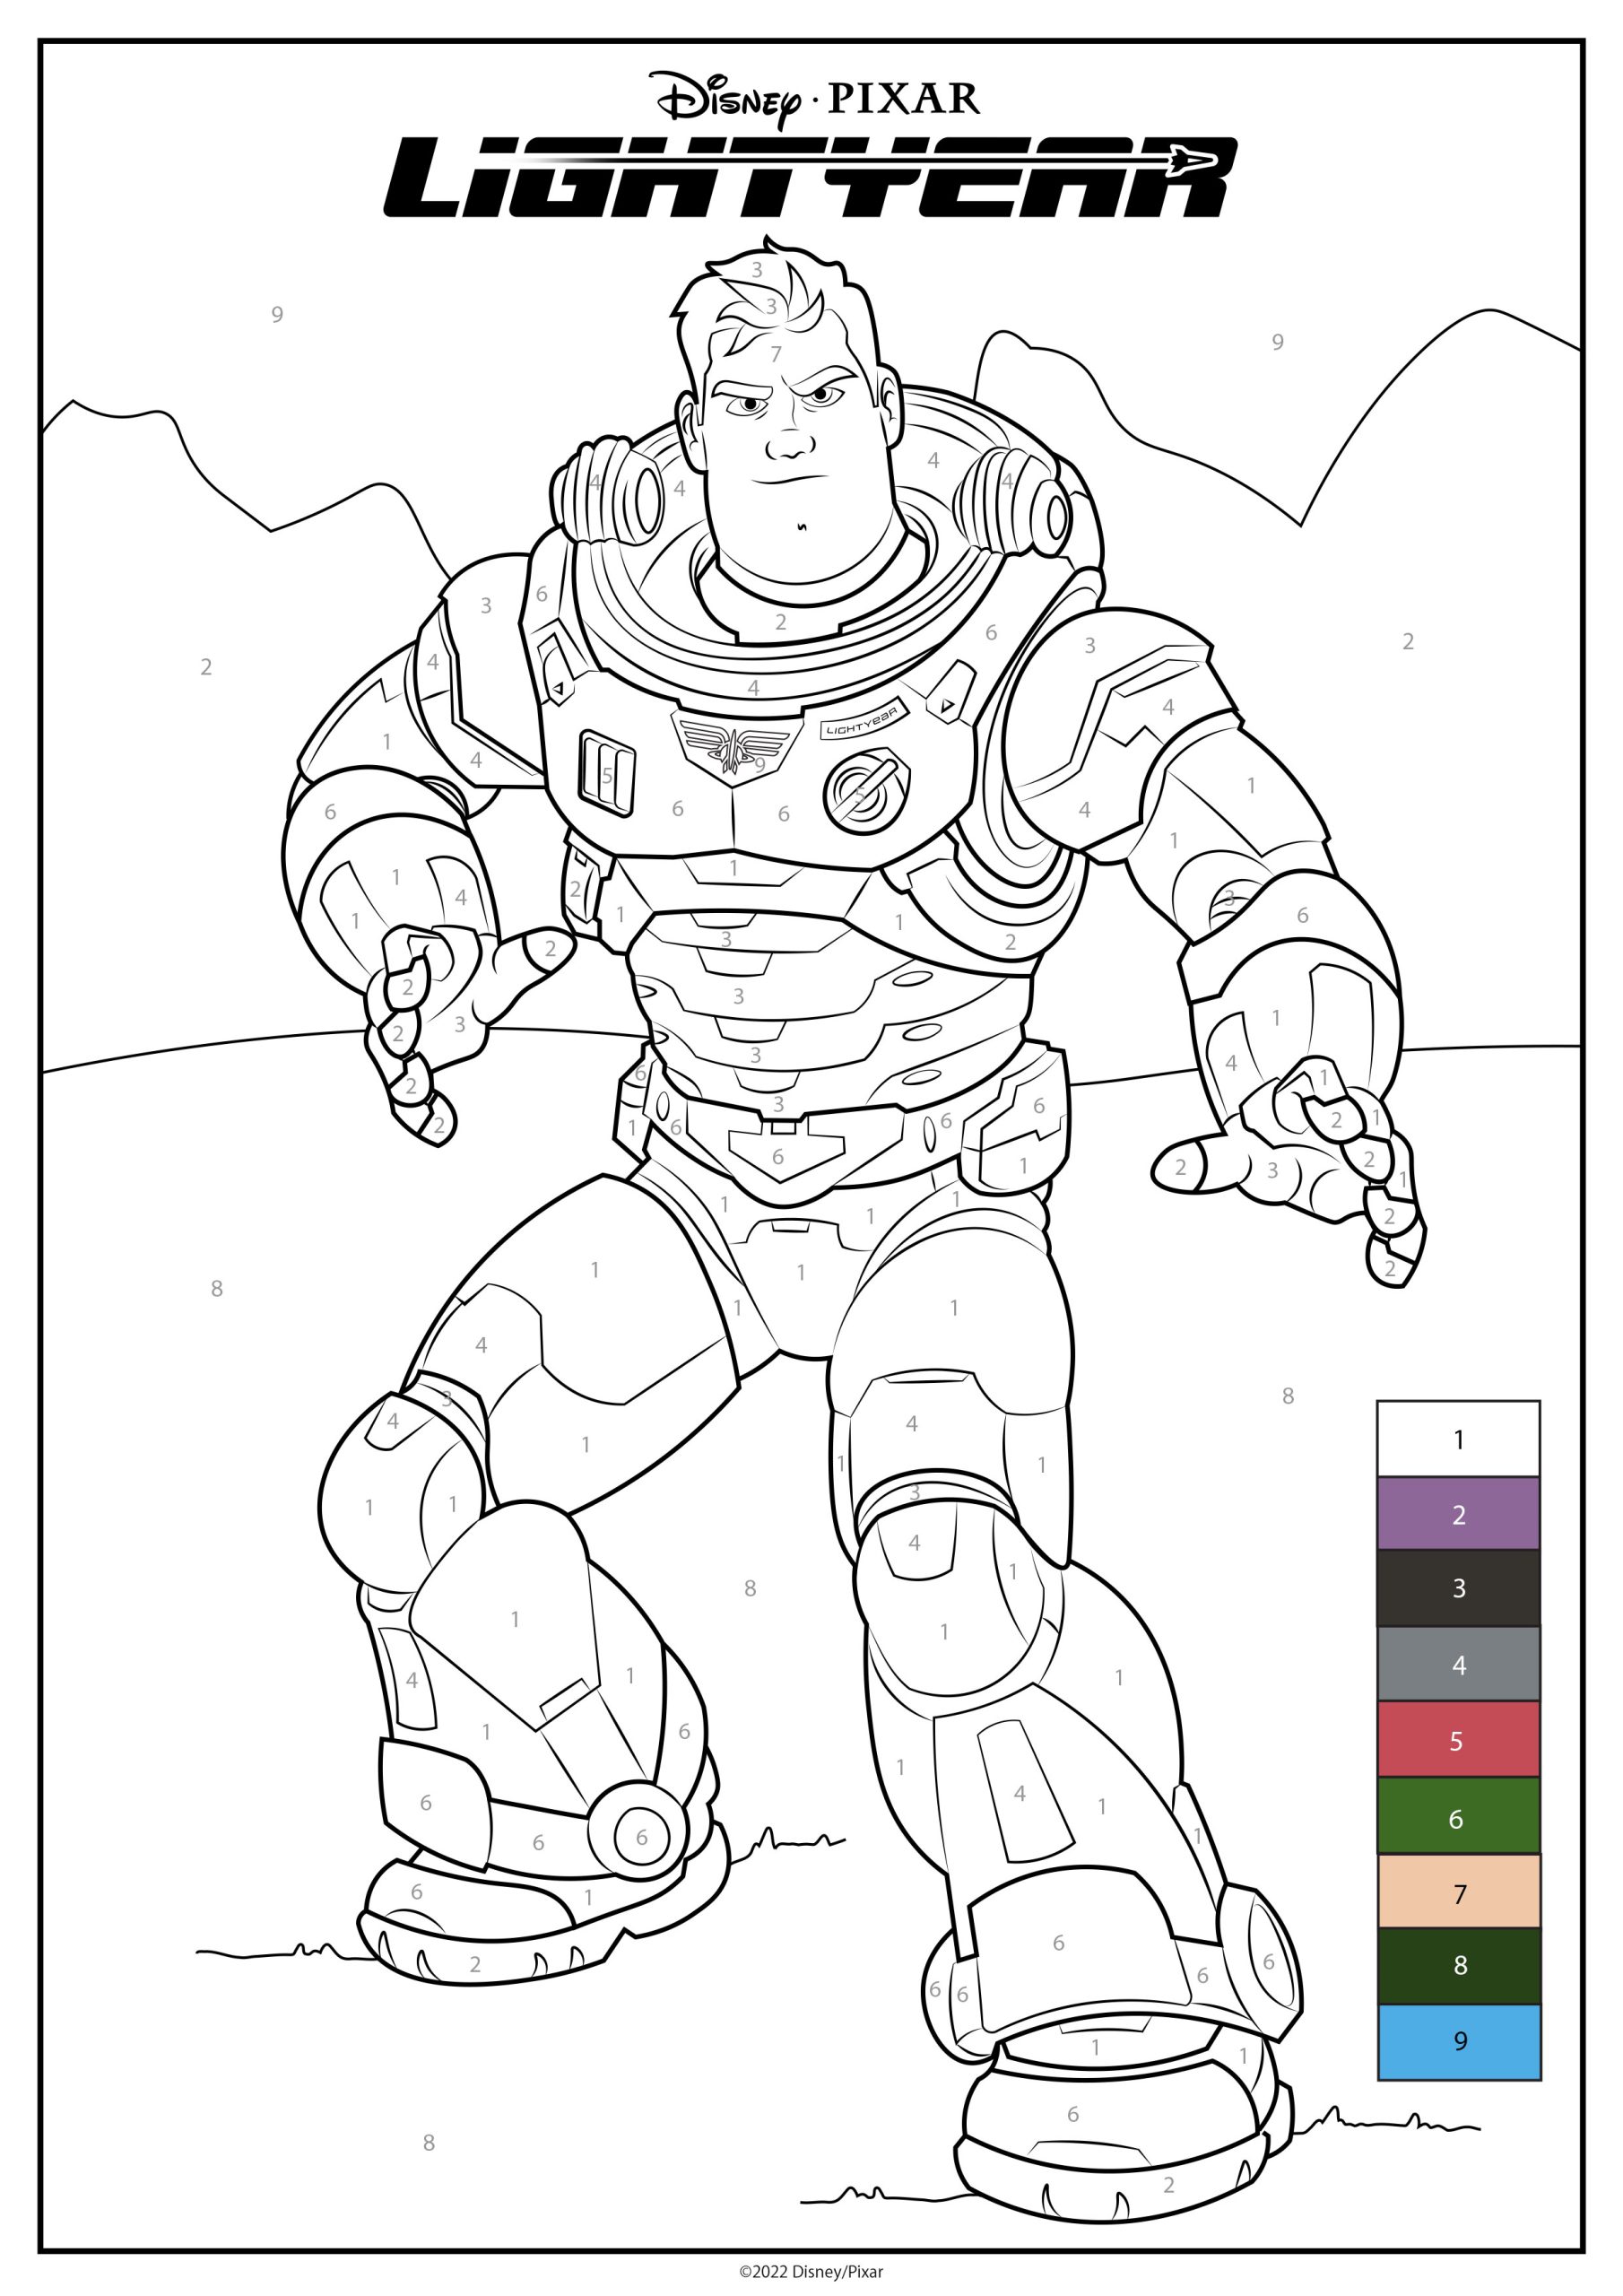 Buzz Lightyear Spaceship Coloring Page